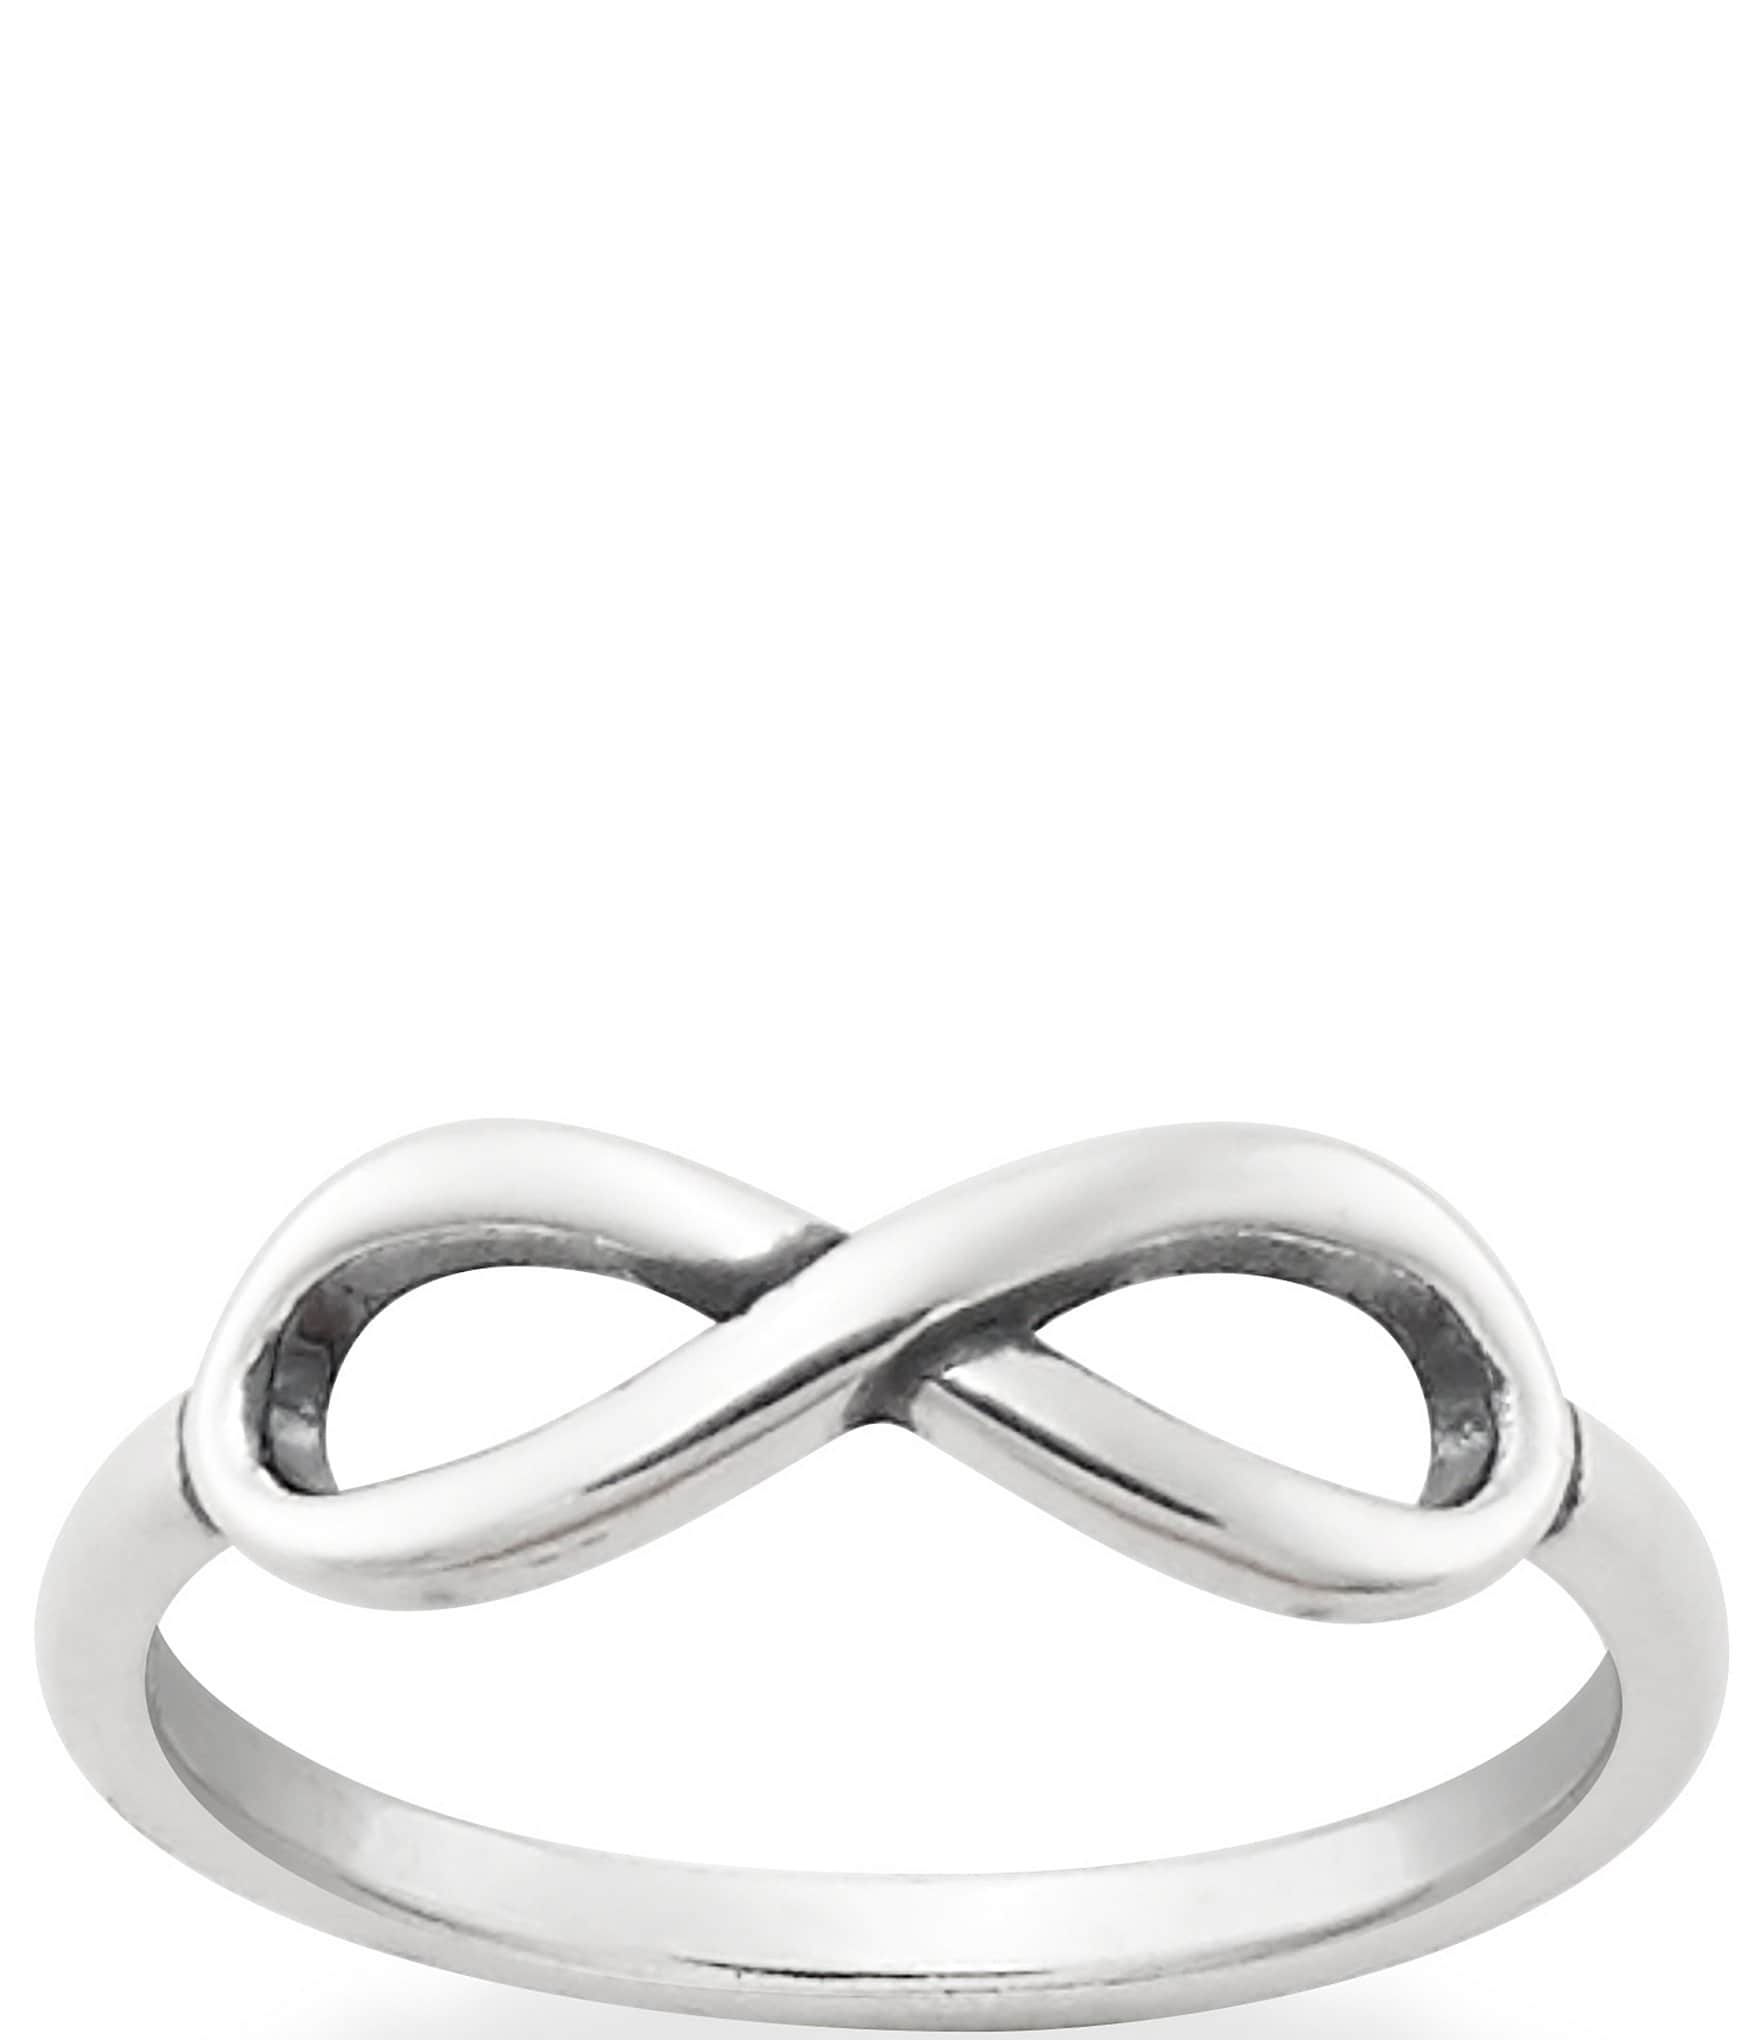 DIY Infinity Ring - Simple! (with Pictures) - Instructables